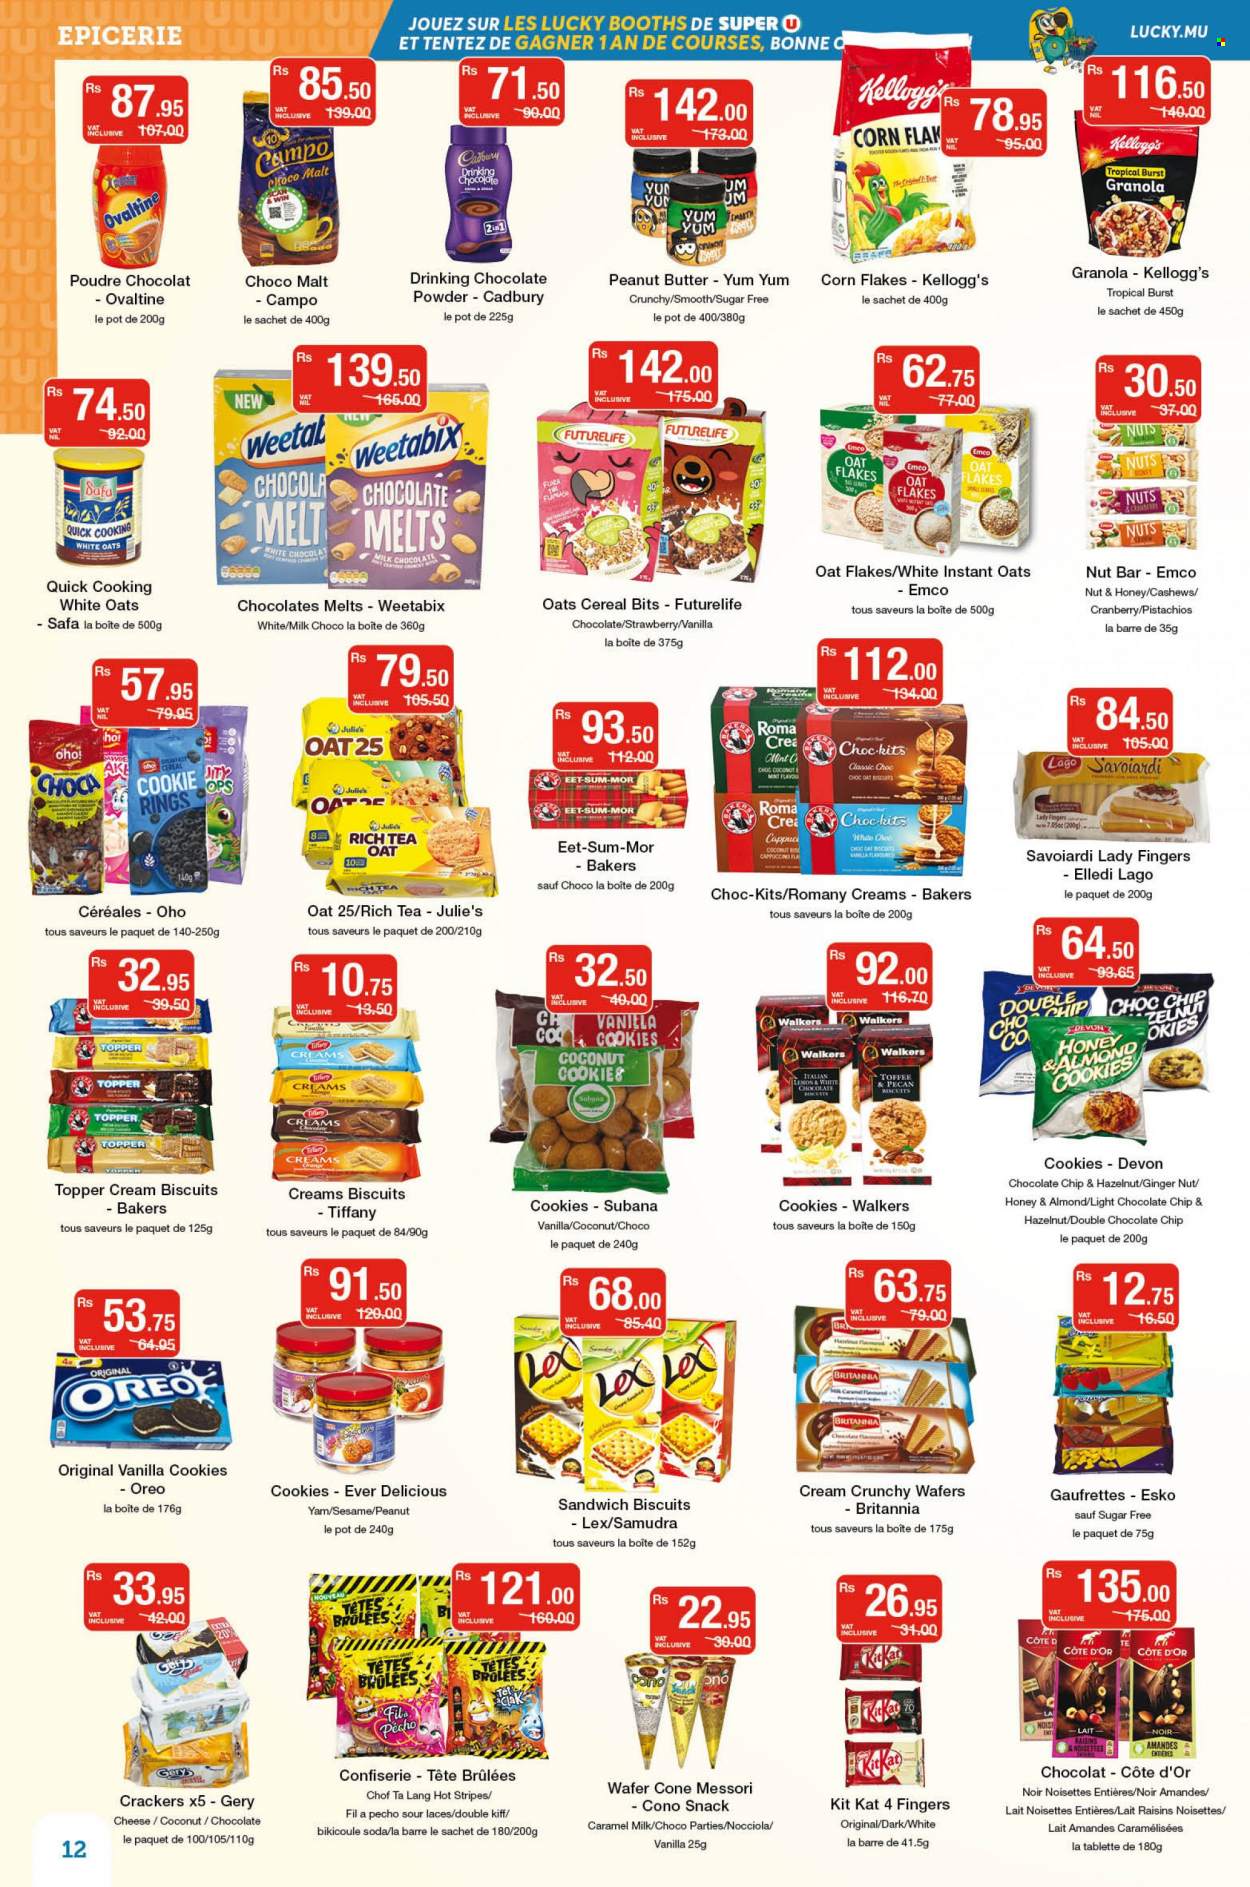 thumbnail - Super U Catalogue - 23.09.2022 - 6.10.2022 - Sales products - ginger, sandwich, cheese, Flora, cookies, lady fingers, wafers, snack, KitKat, toffee, crackers, Kellogg's, biscuit, Cadbury, coconut cookies, Julie's, malt, cereals, corn flakes, nut bar, Weetabix, caramel, honey, peanut butter, cashews, dried fruit, pistachios, soda, hot chocolate, tea, cappuccino, pot, Bakers, granola, raisins, Oreo. Page 12.